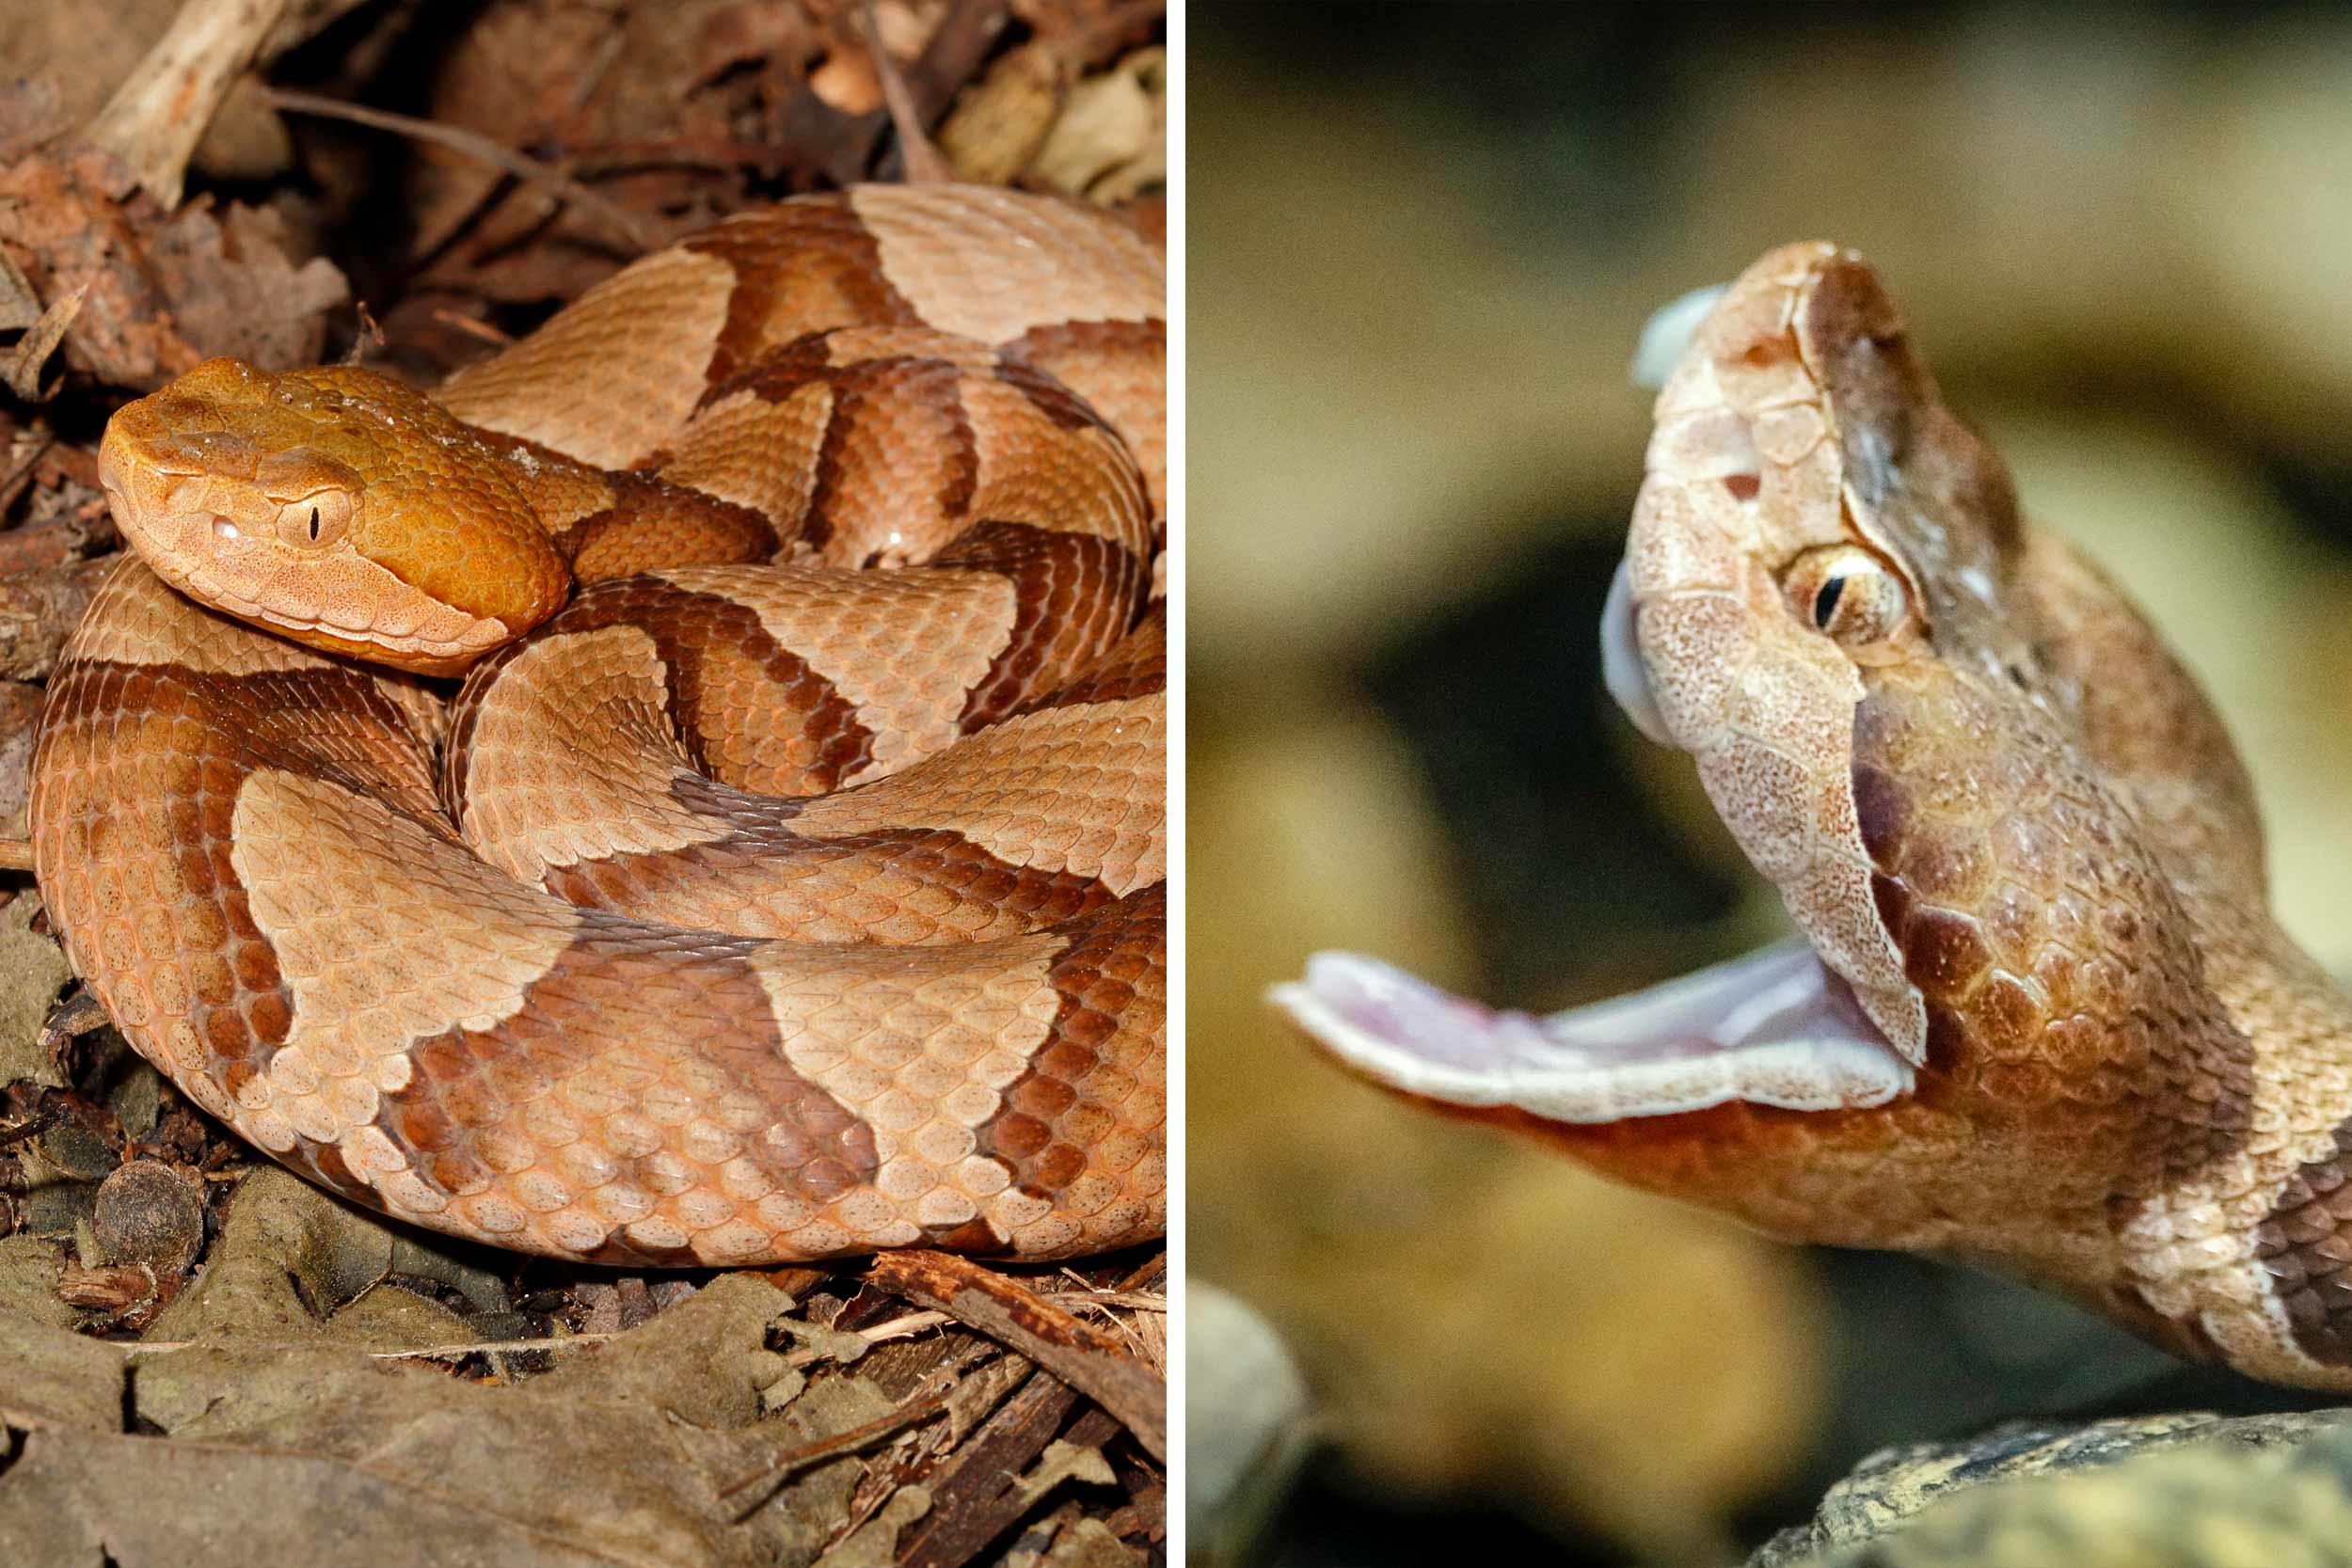 A copperhead snake lies coiled in leaves and a copperhead snake opens its mouth